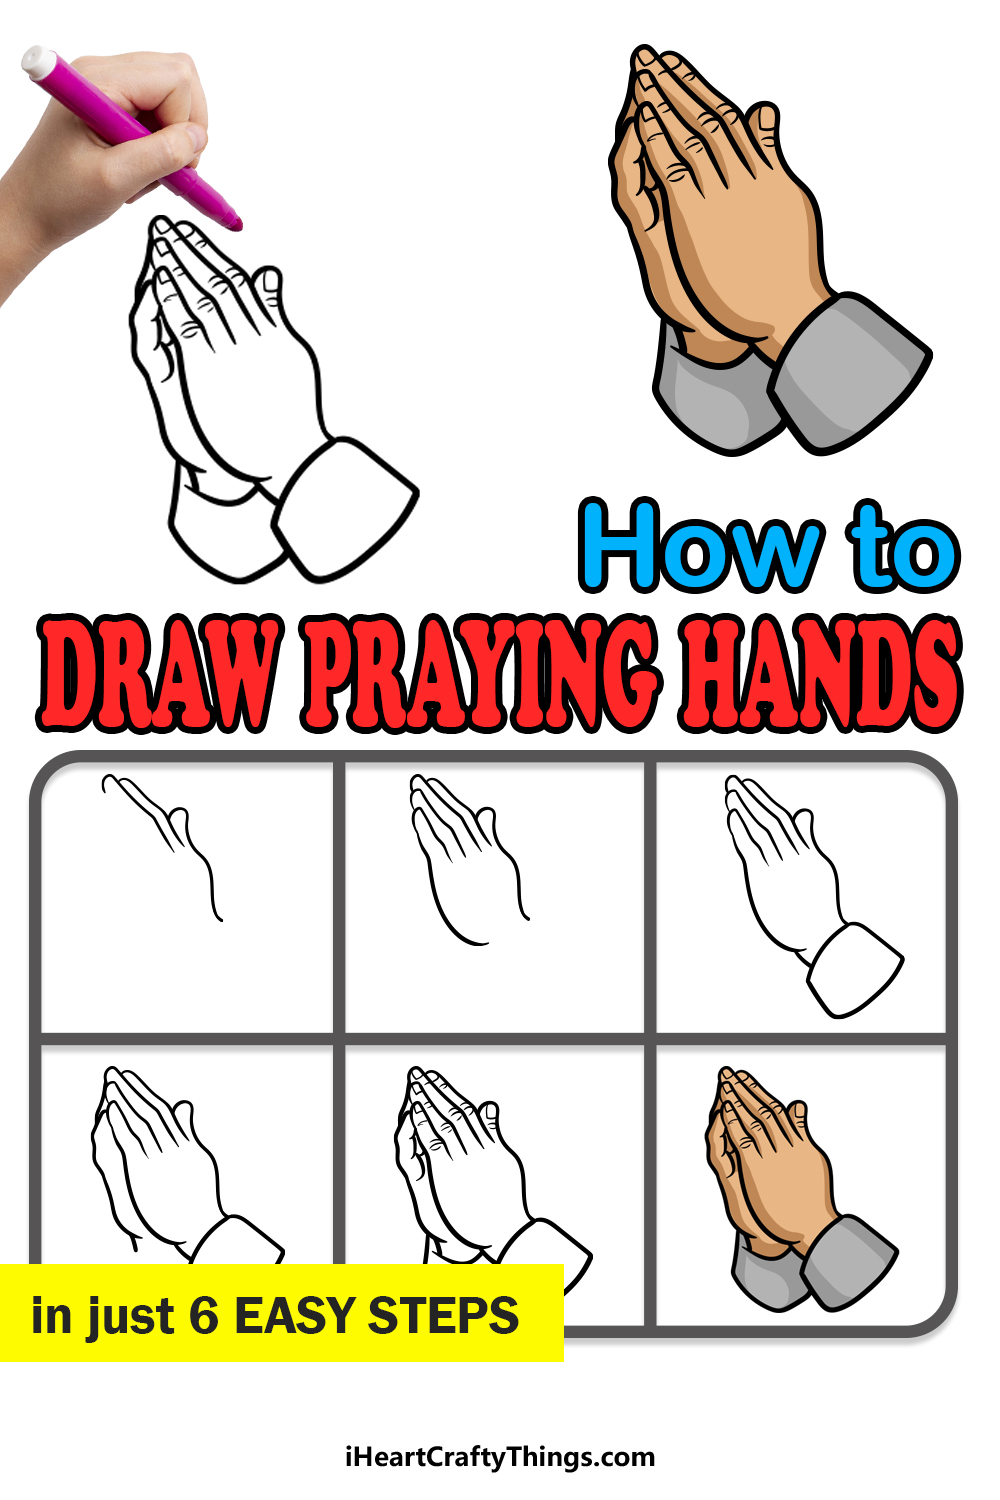 how to draw praying hands in 6 easy steps